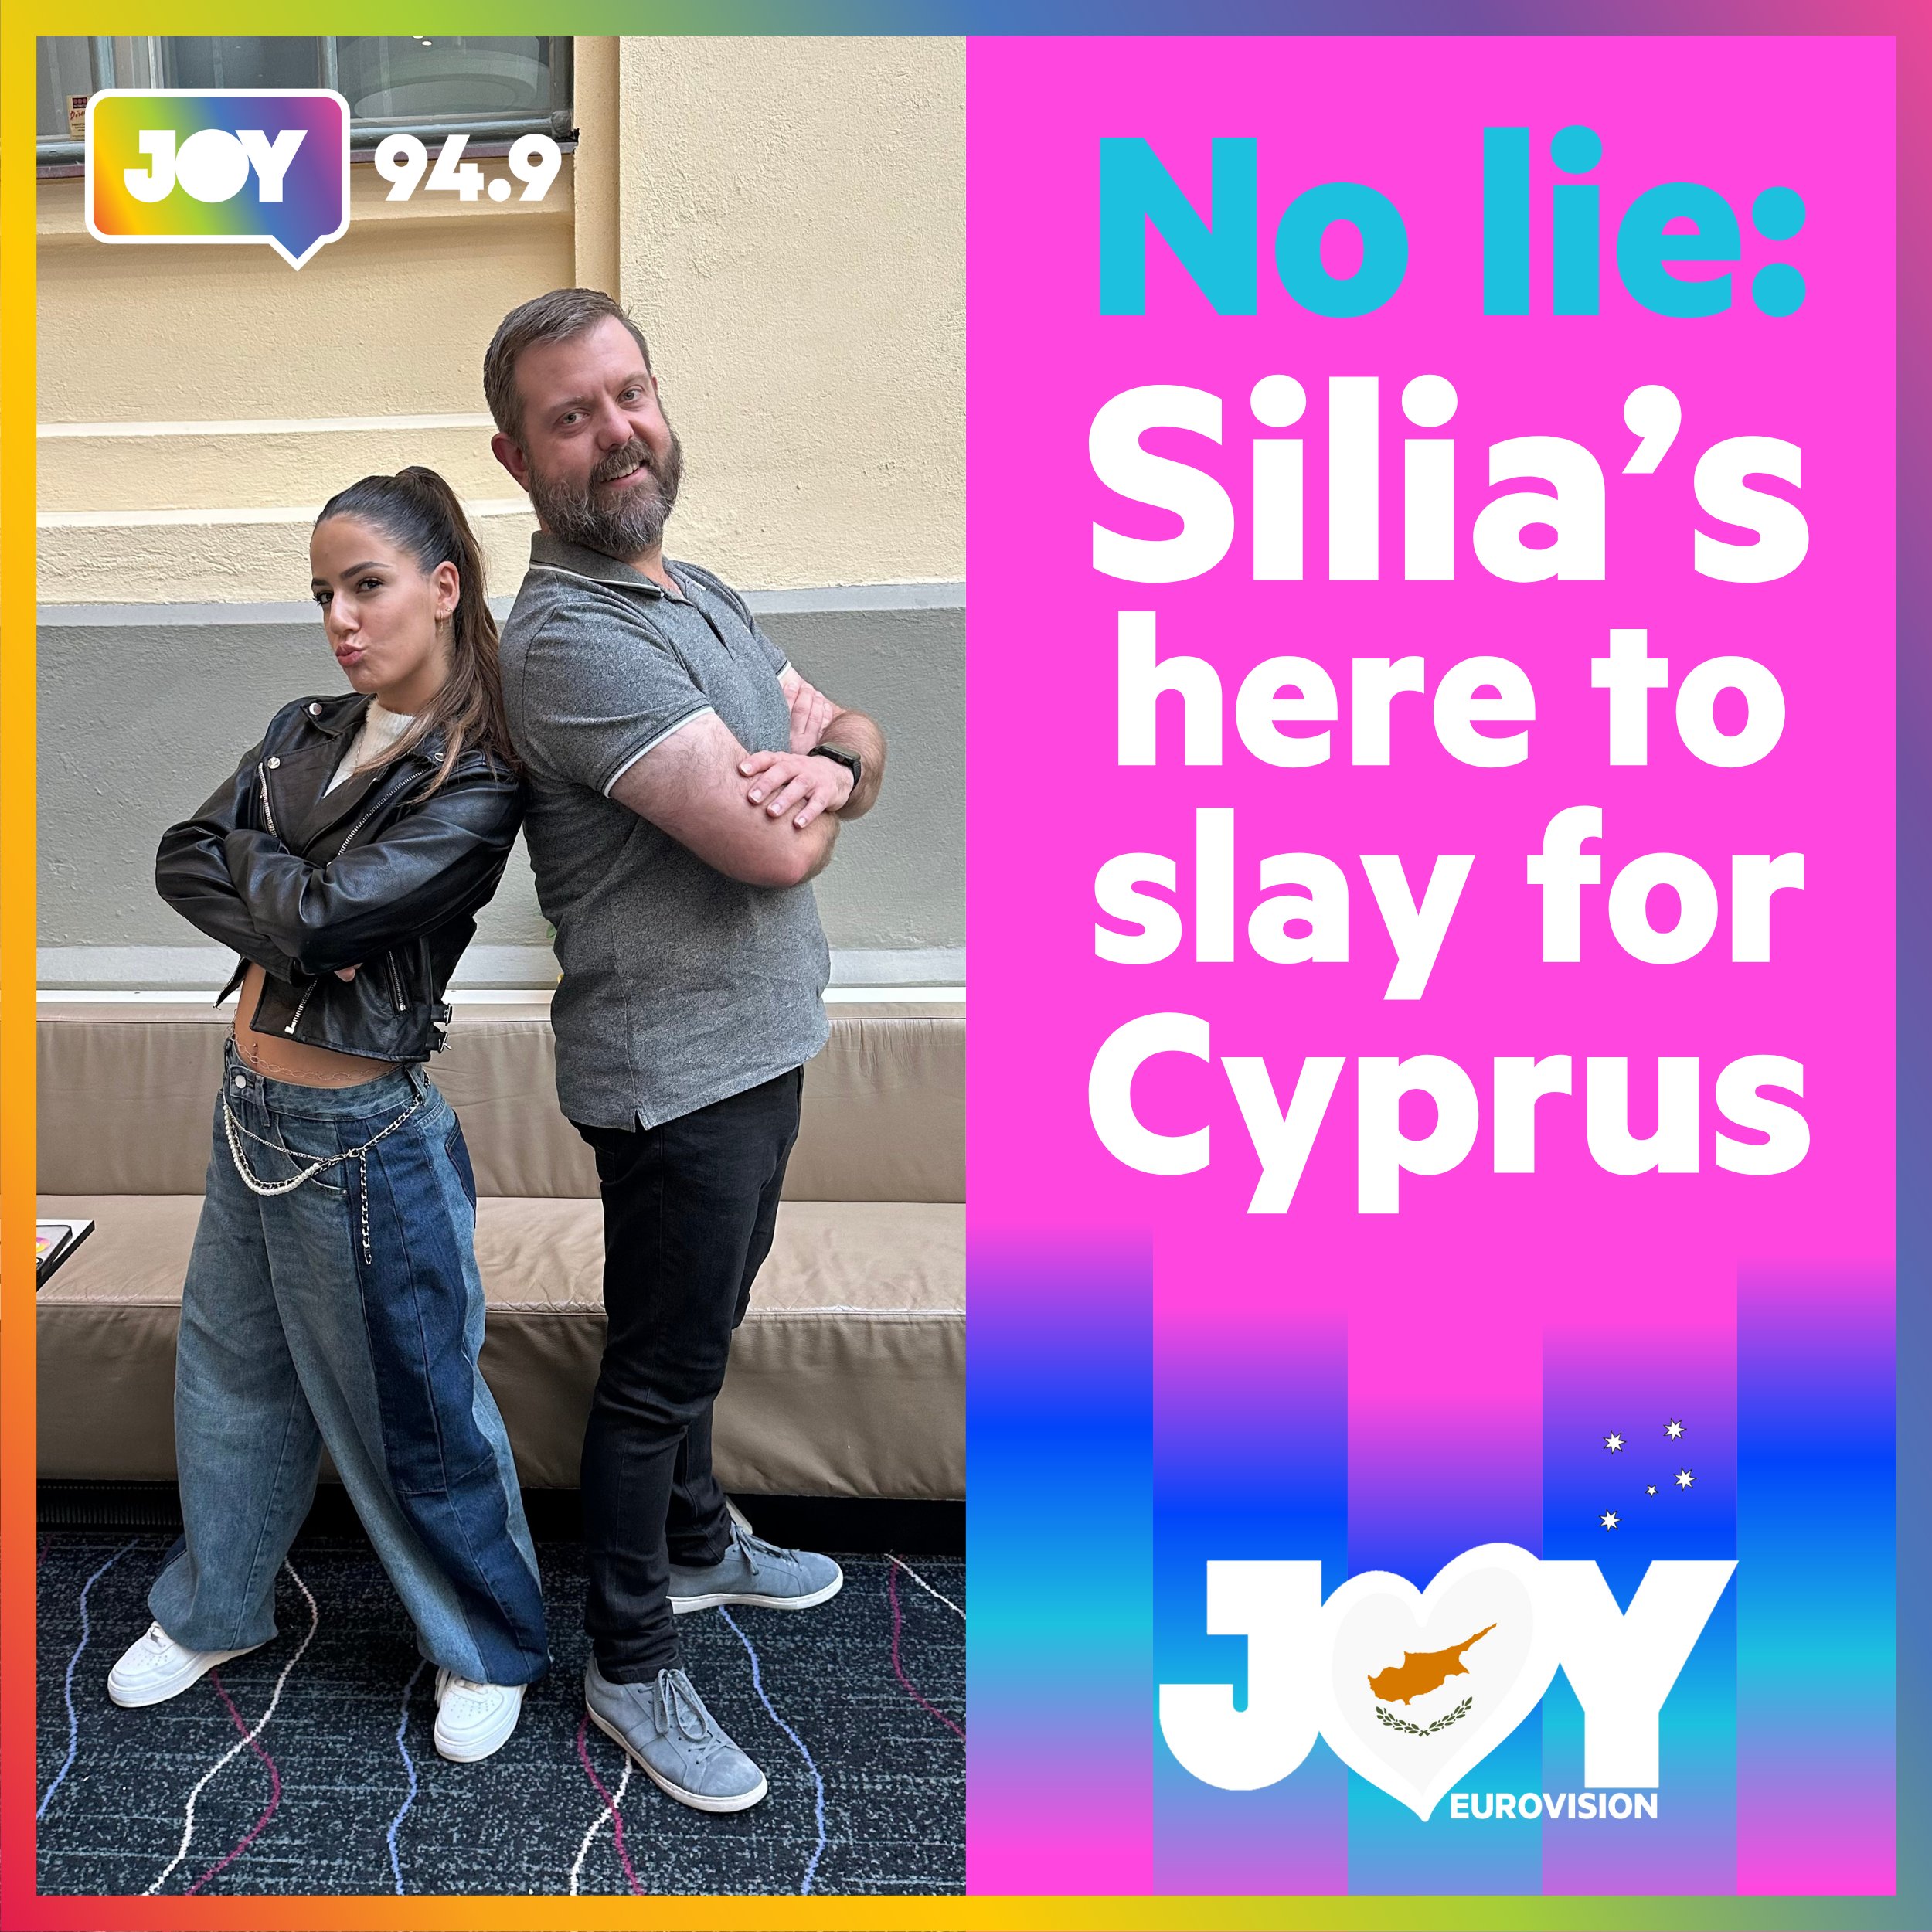 🇨🇾 No lie: Silia’s here to slay for Cyprus